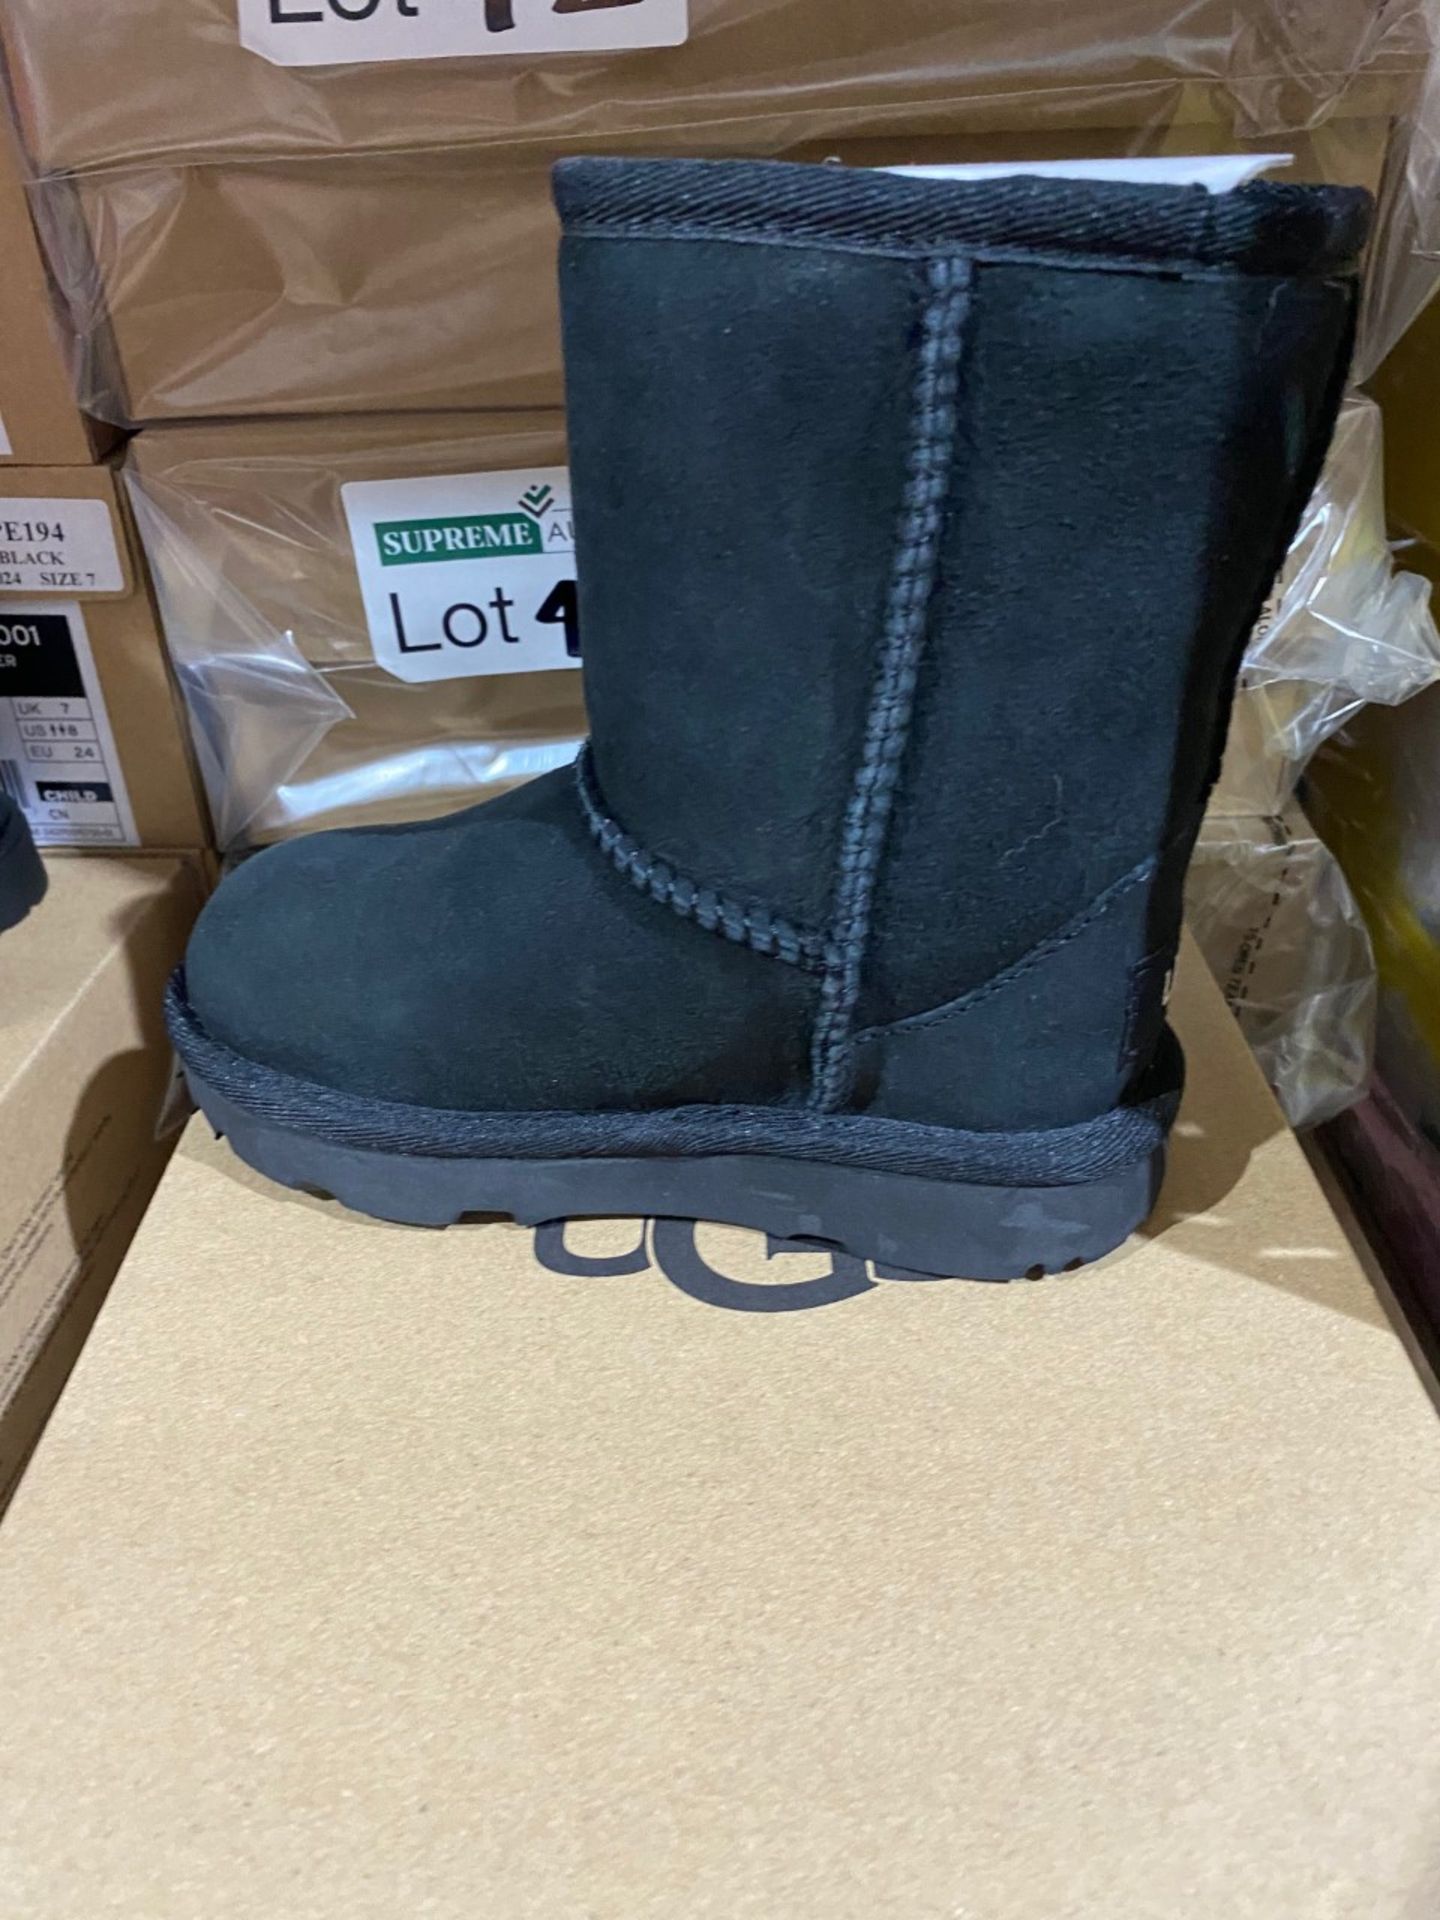 NEW & BOXED UGG BLACK BOOT SIZE INFANT 7 - Image 2 of 2